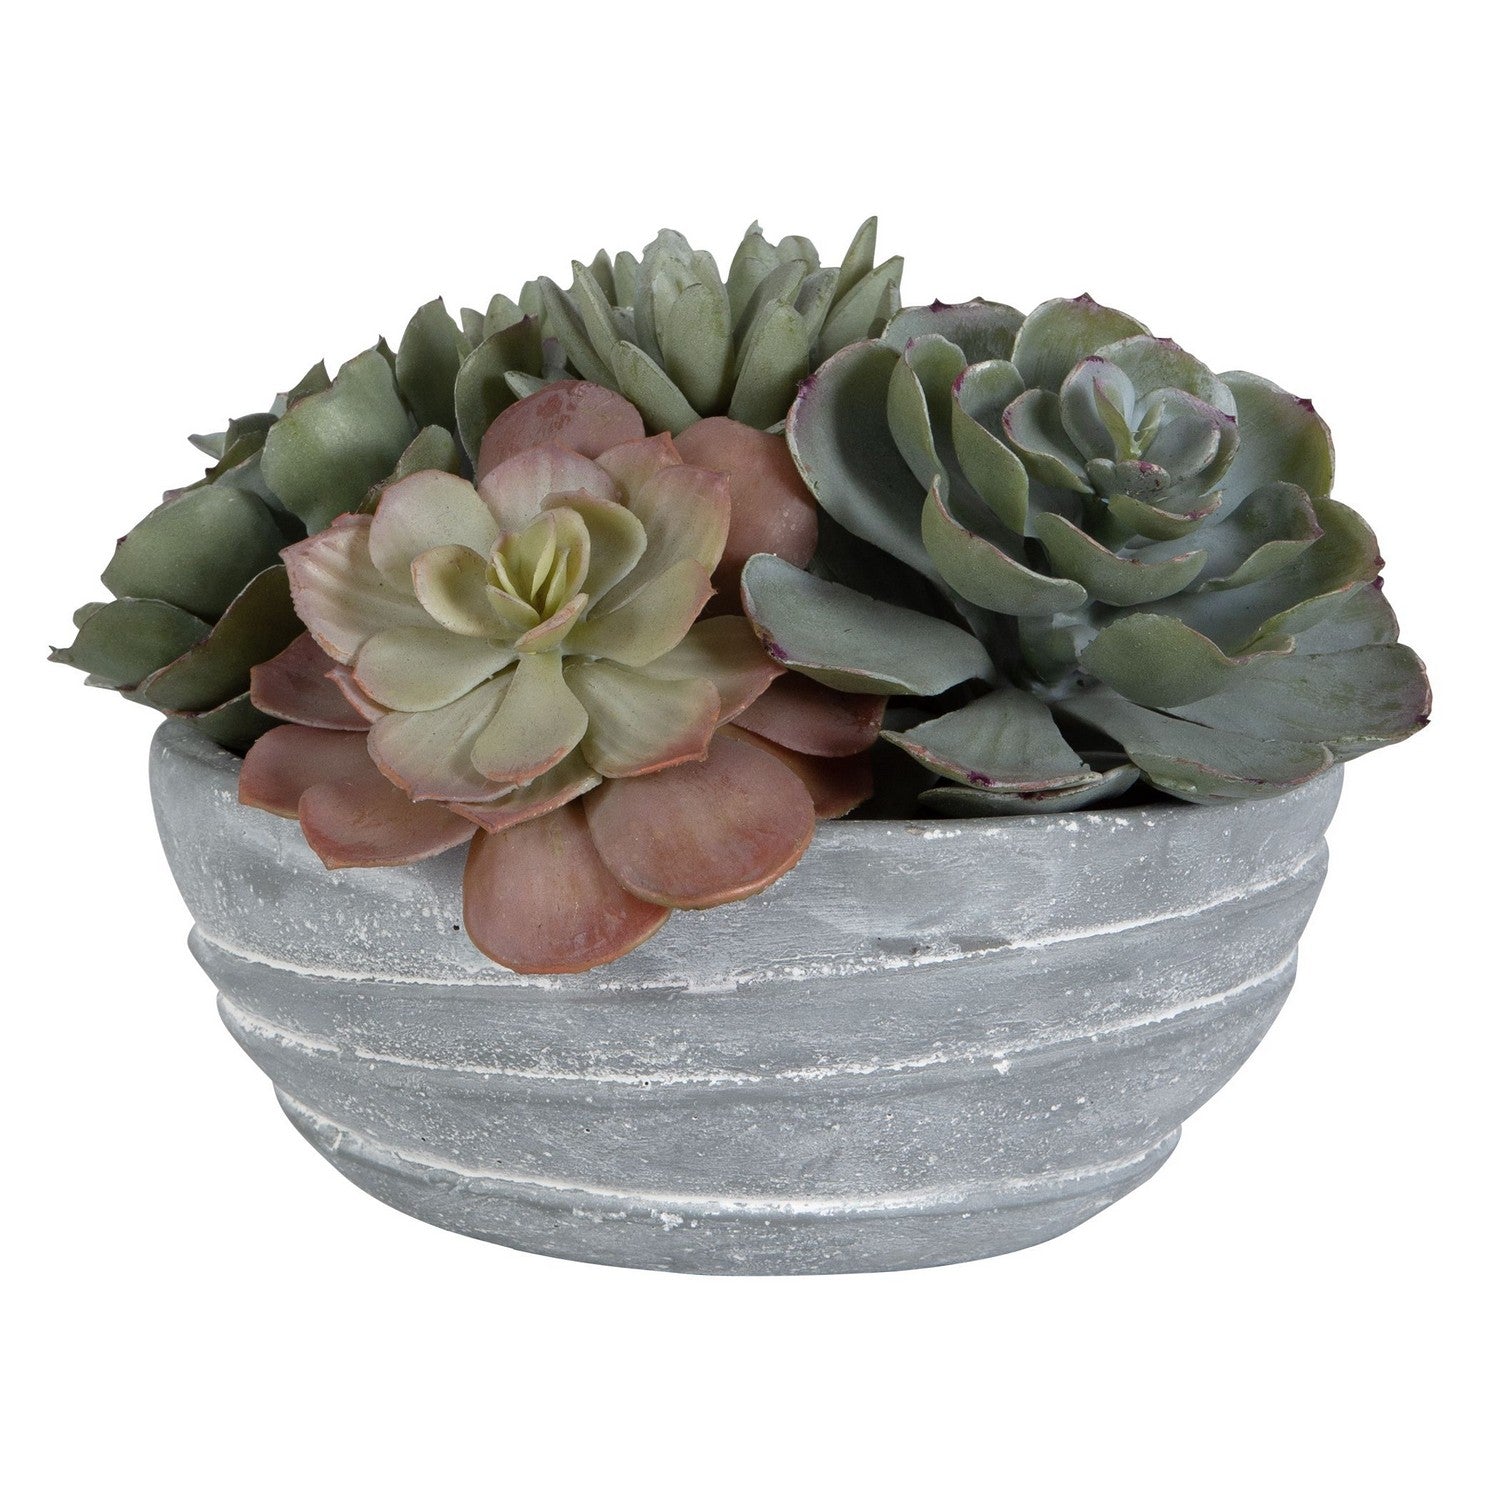 Uttermost - 60212 - Succulent Accent - Peoria - Green And Burgundy Tones